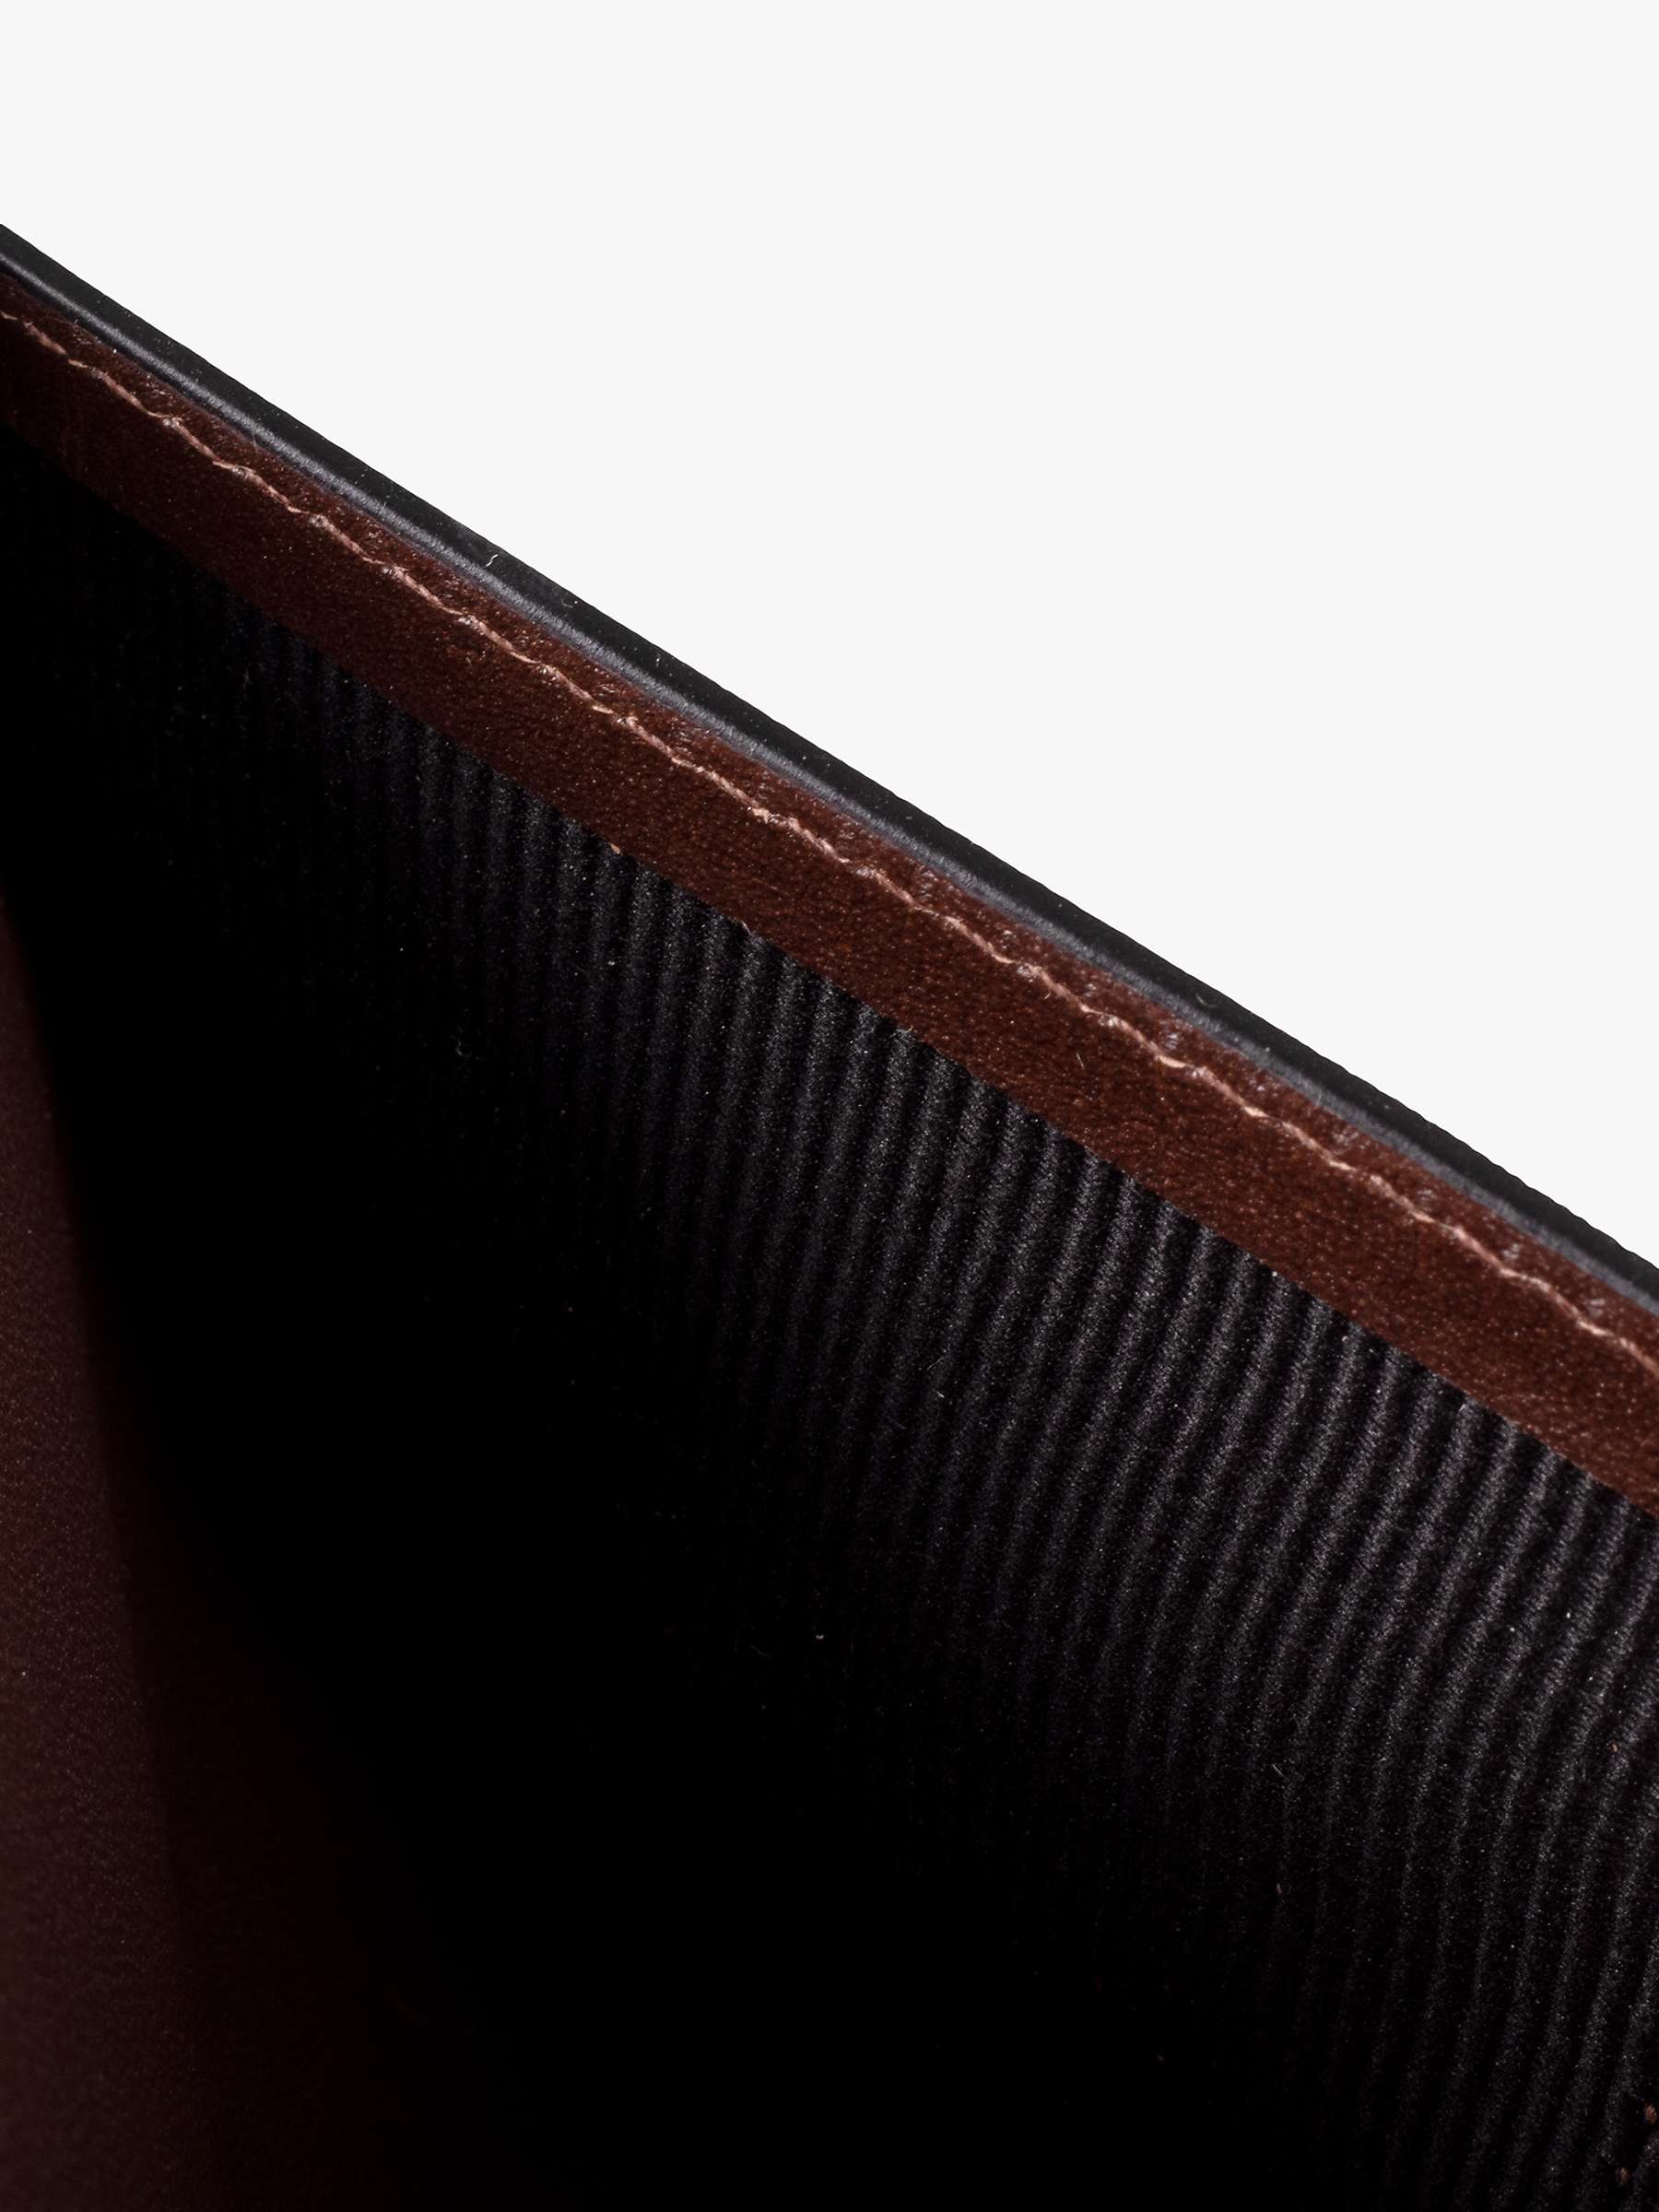 Buy John Lewis Vegetable Tanned Leather Card Coin Bifold Wallet Online at johnlewis.com